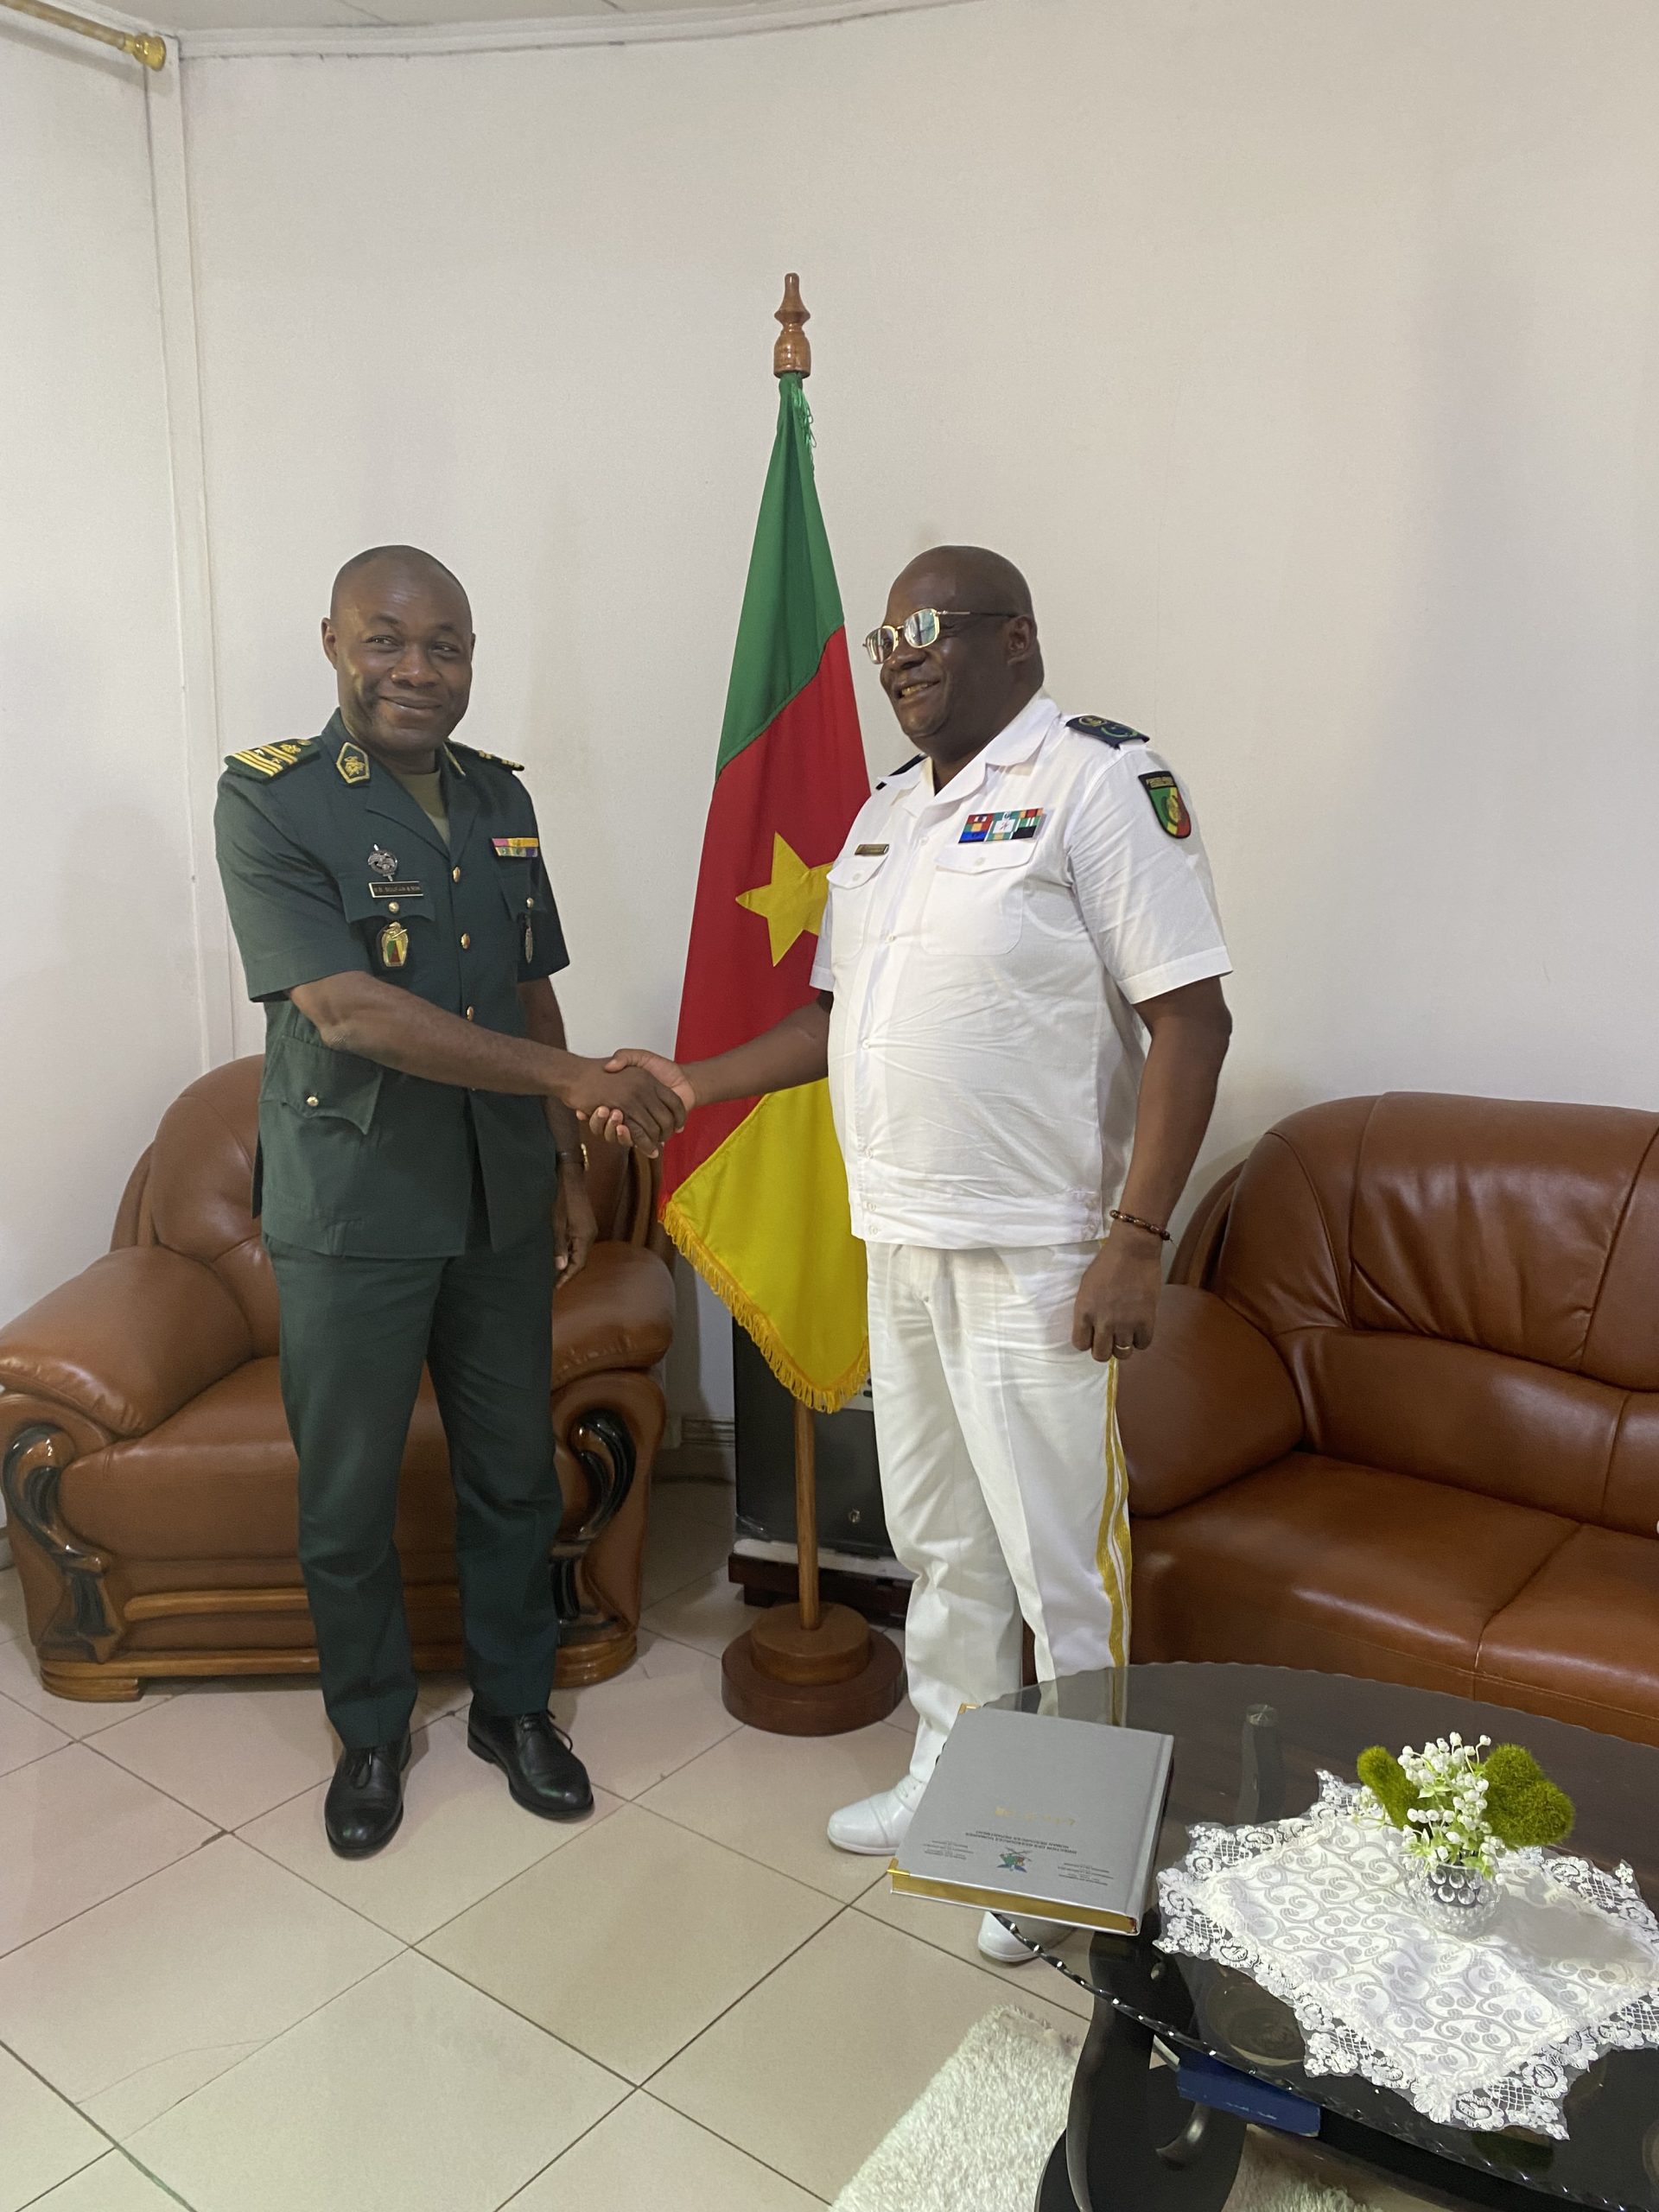 Cameroon and Congo in phase for military cooperation based on skills sharing.